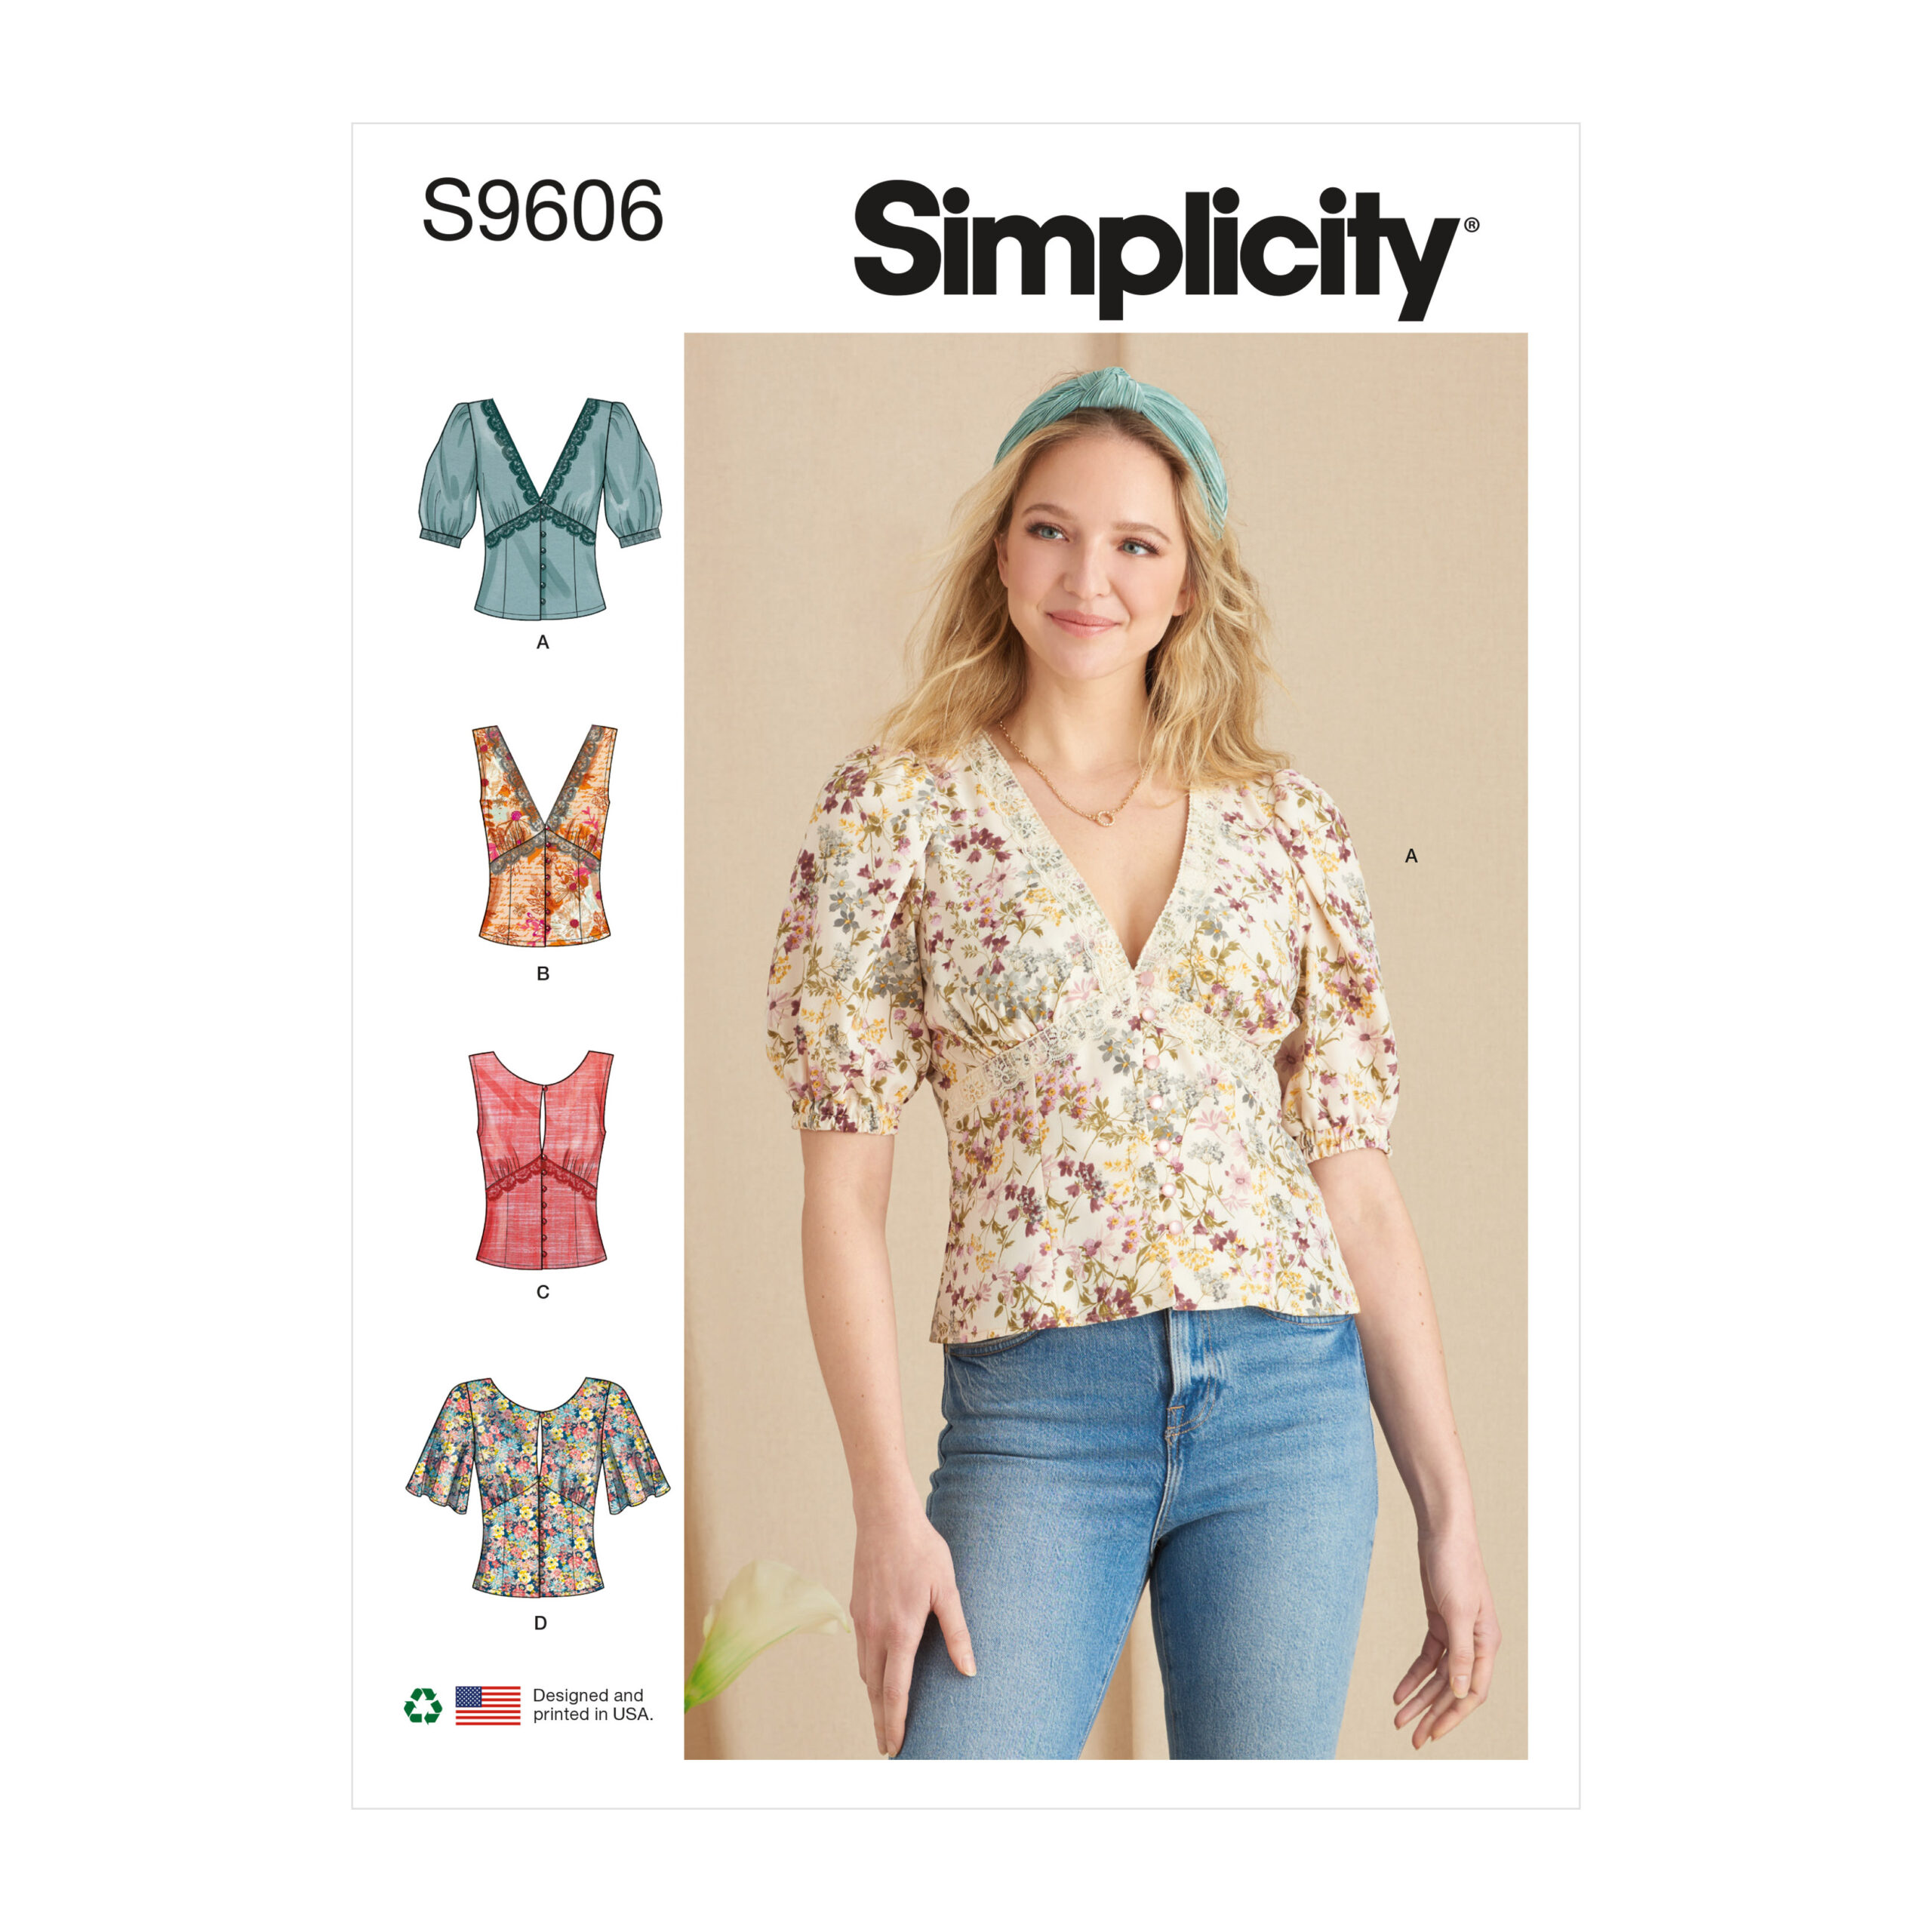 Simplicity Pattern 8549 Women's' Bra Tops – Remnant House Fabric